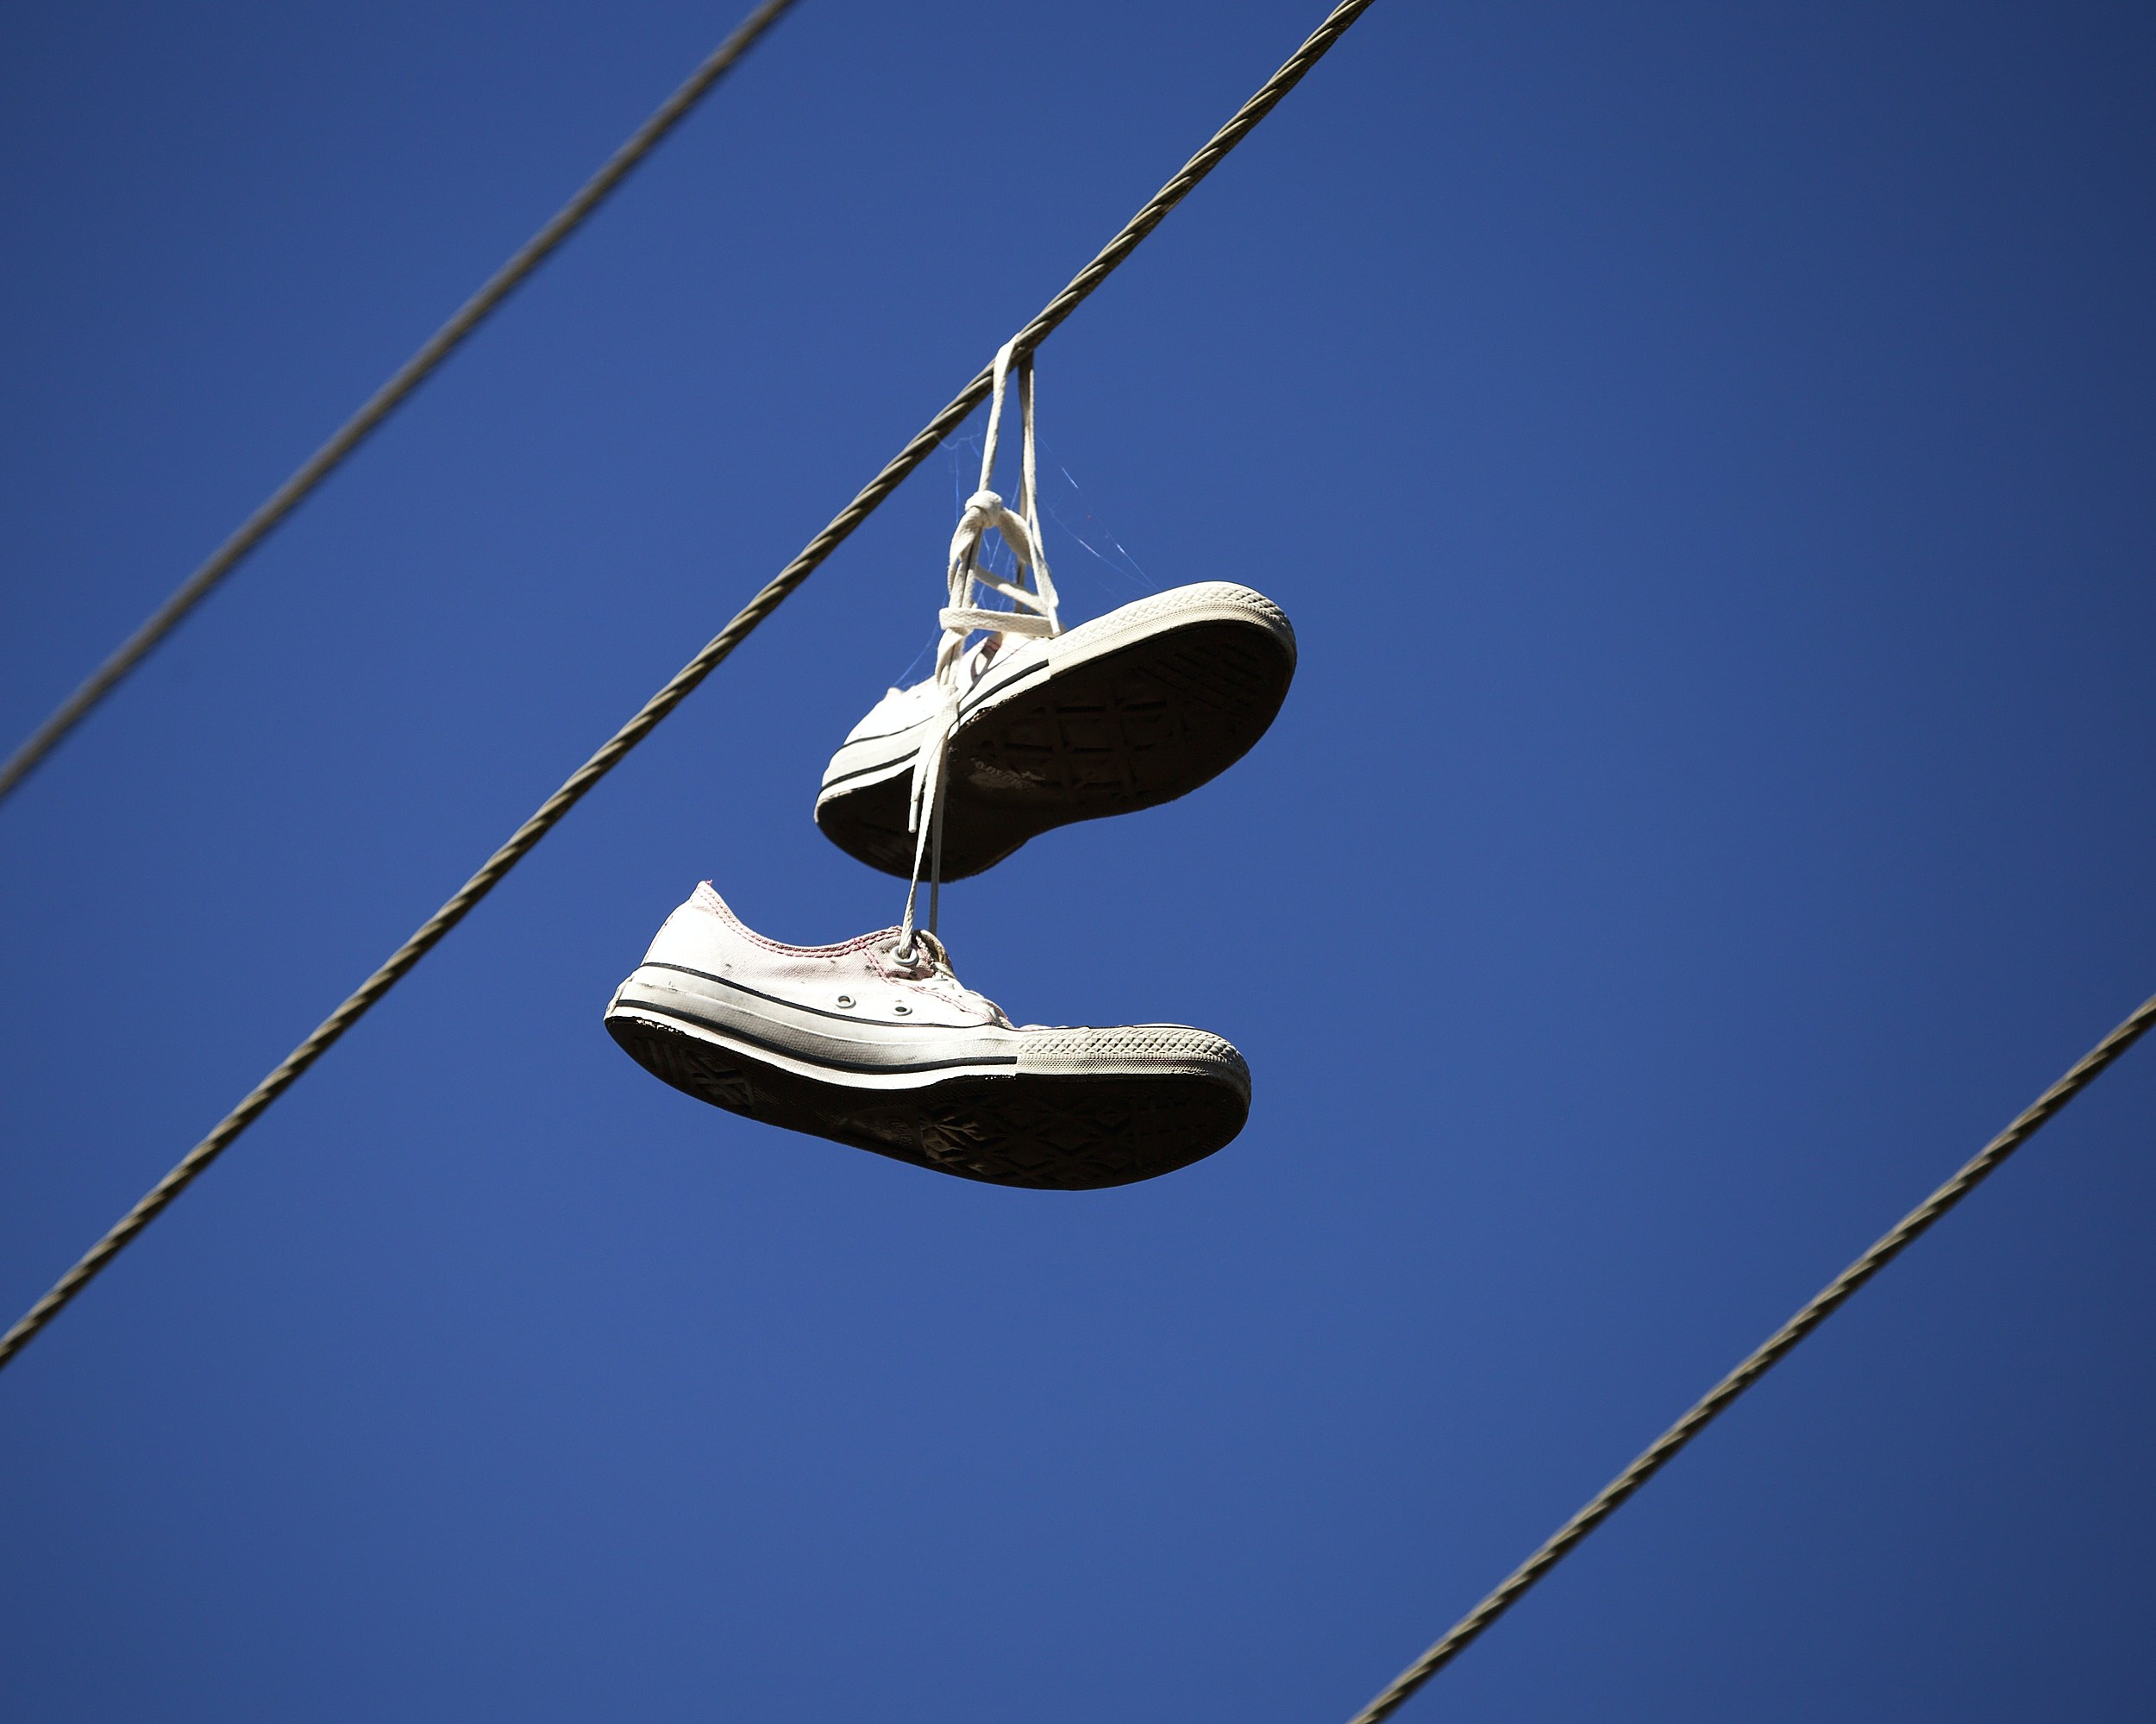 41 Shoes Hanging Powerlines Images, Stock Photos, 3D objects, & Vectors |  Shutterstock